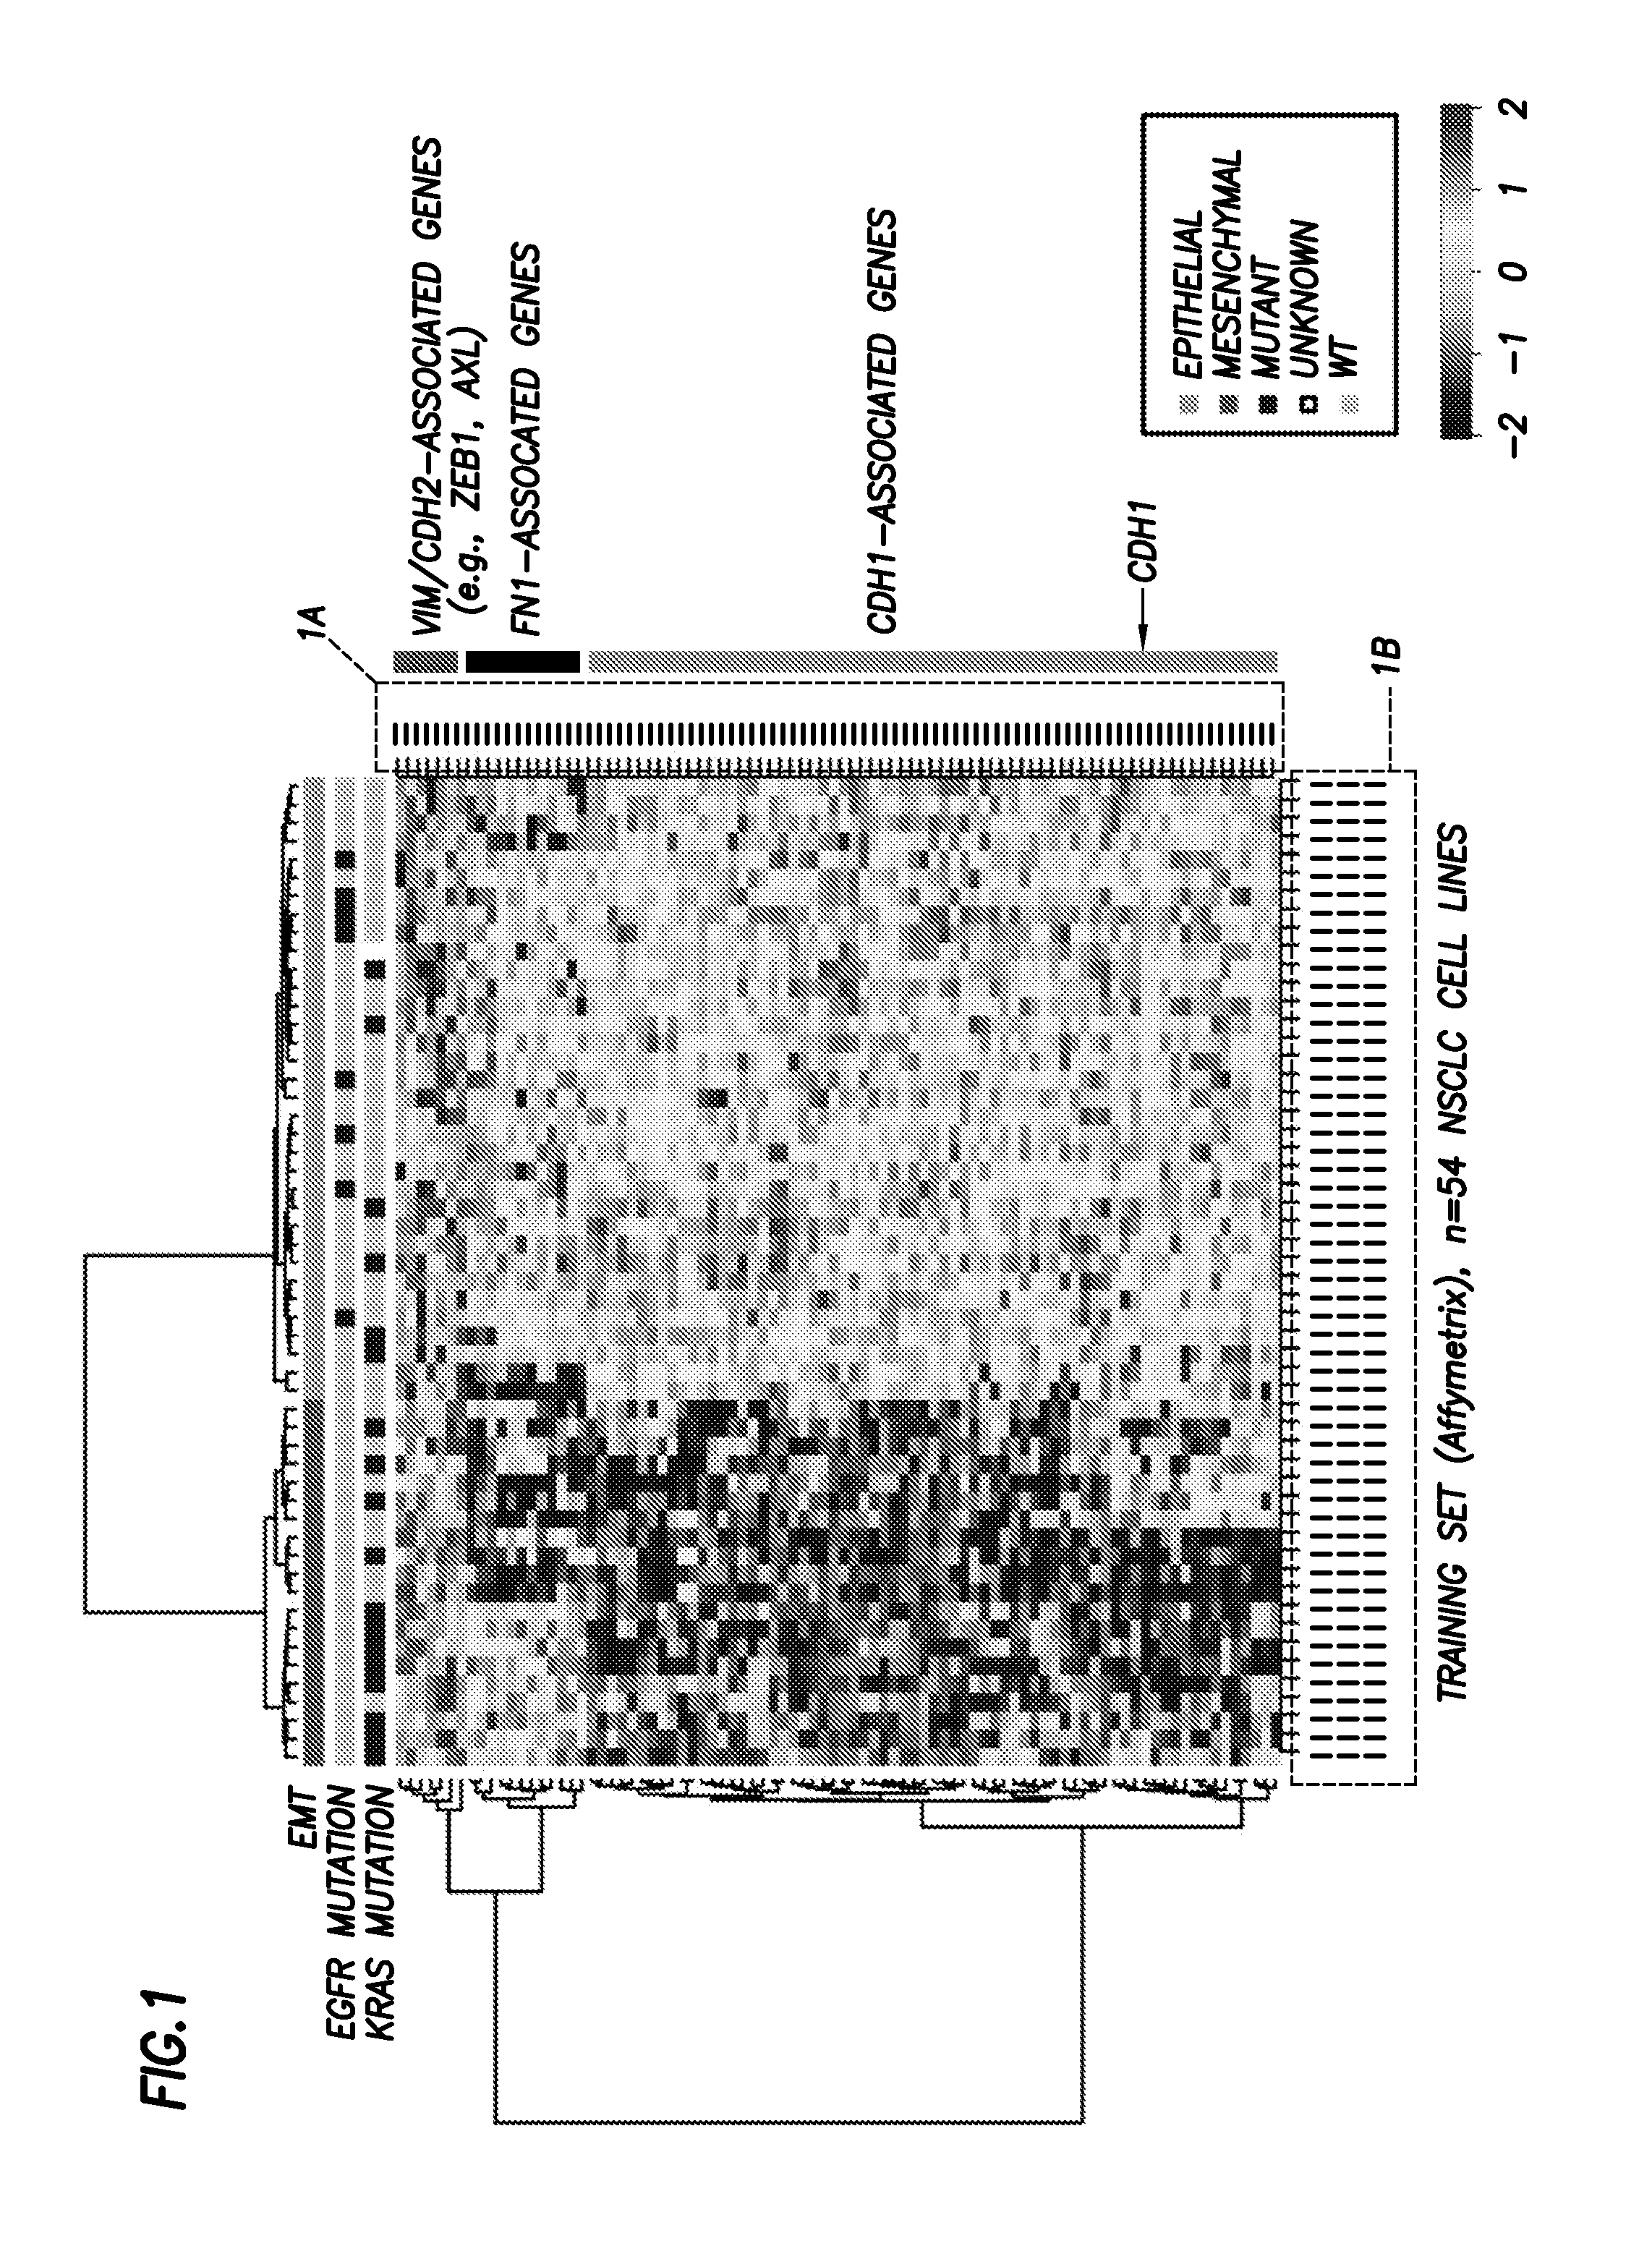 Emt signatures and predictive markers and method of using the same